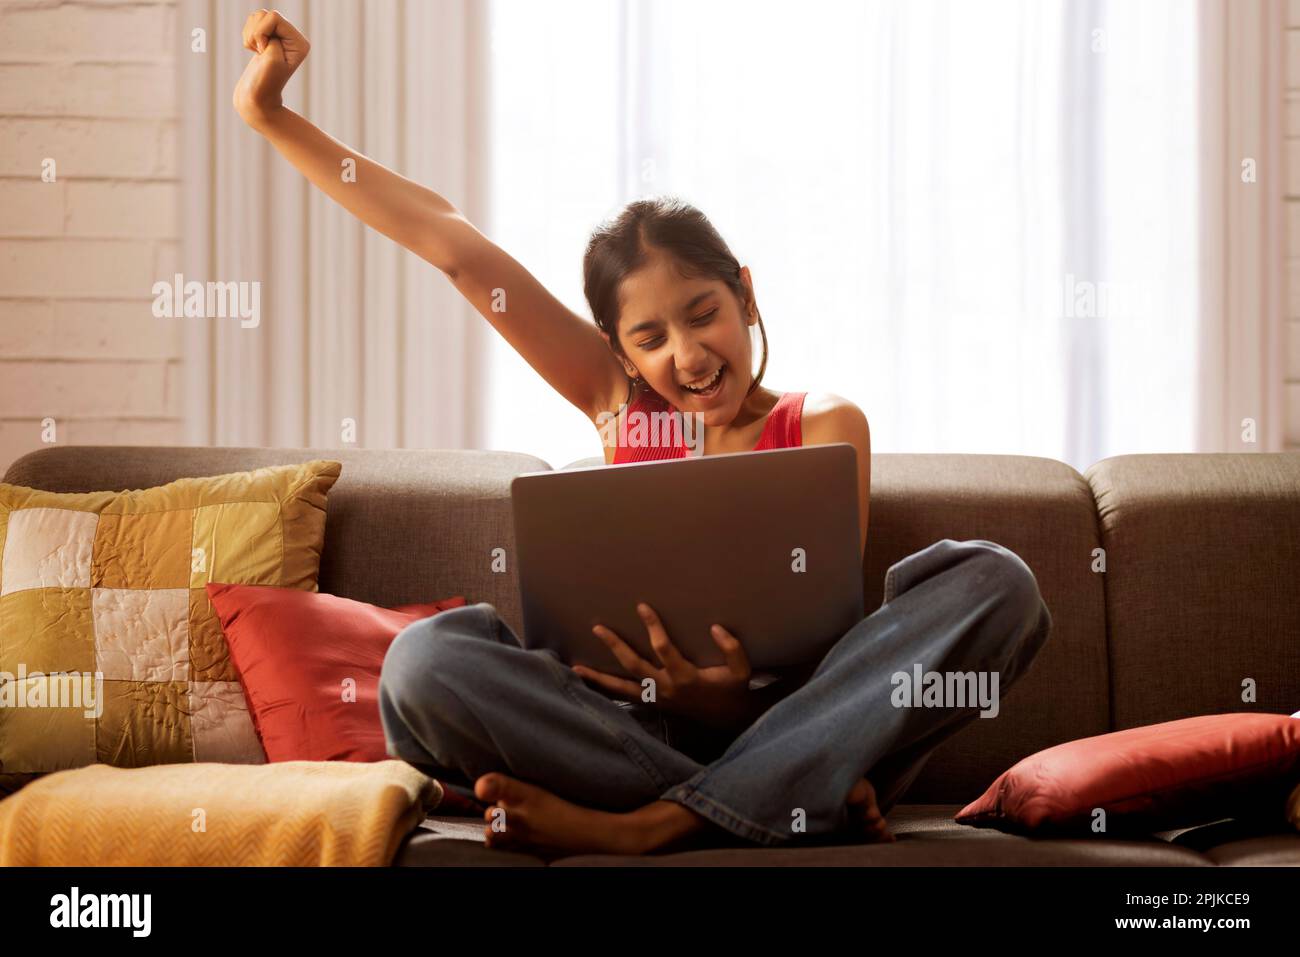 Excited girl cheering while watching video on laptop in living room Stock Photo